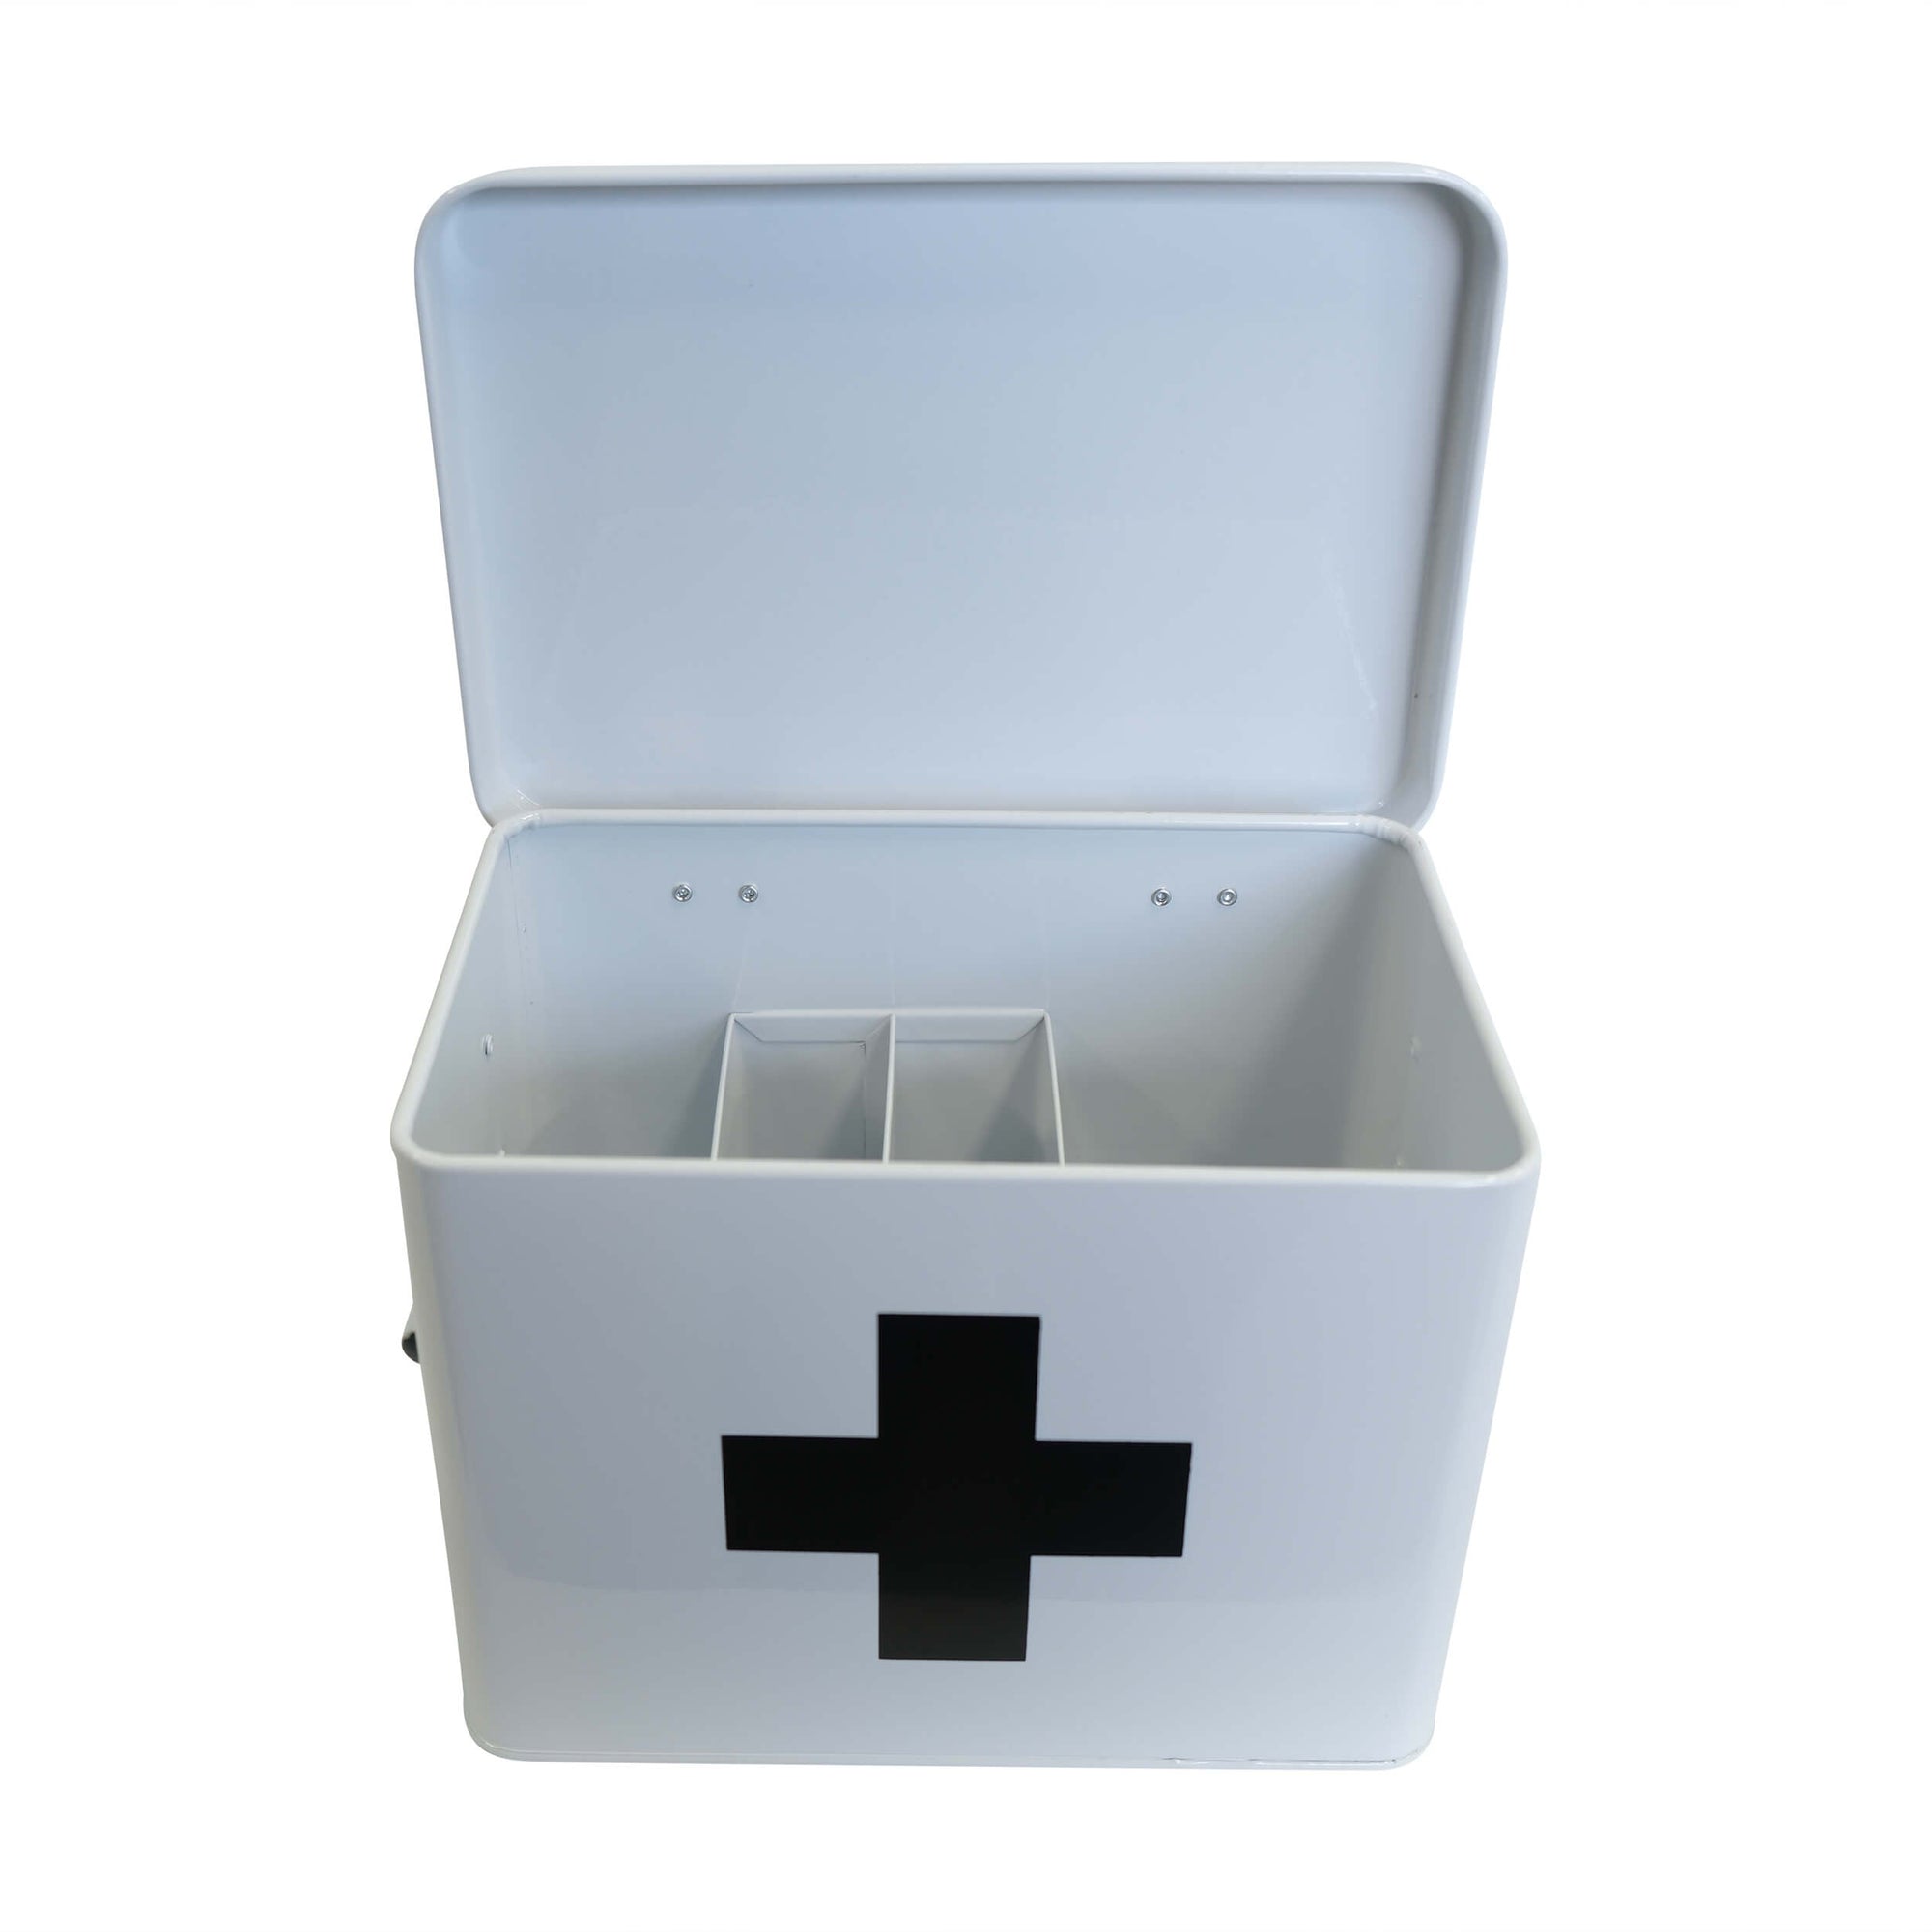 Medicine Box With Dividers White - LAUNDRY - Accessories - Soko and Co